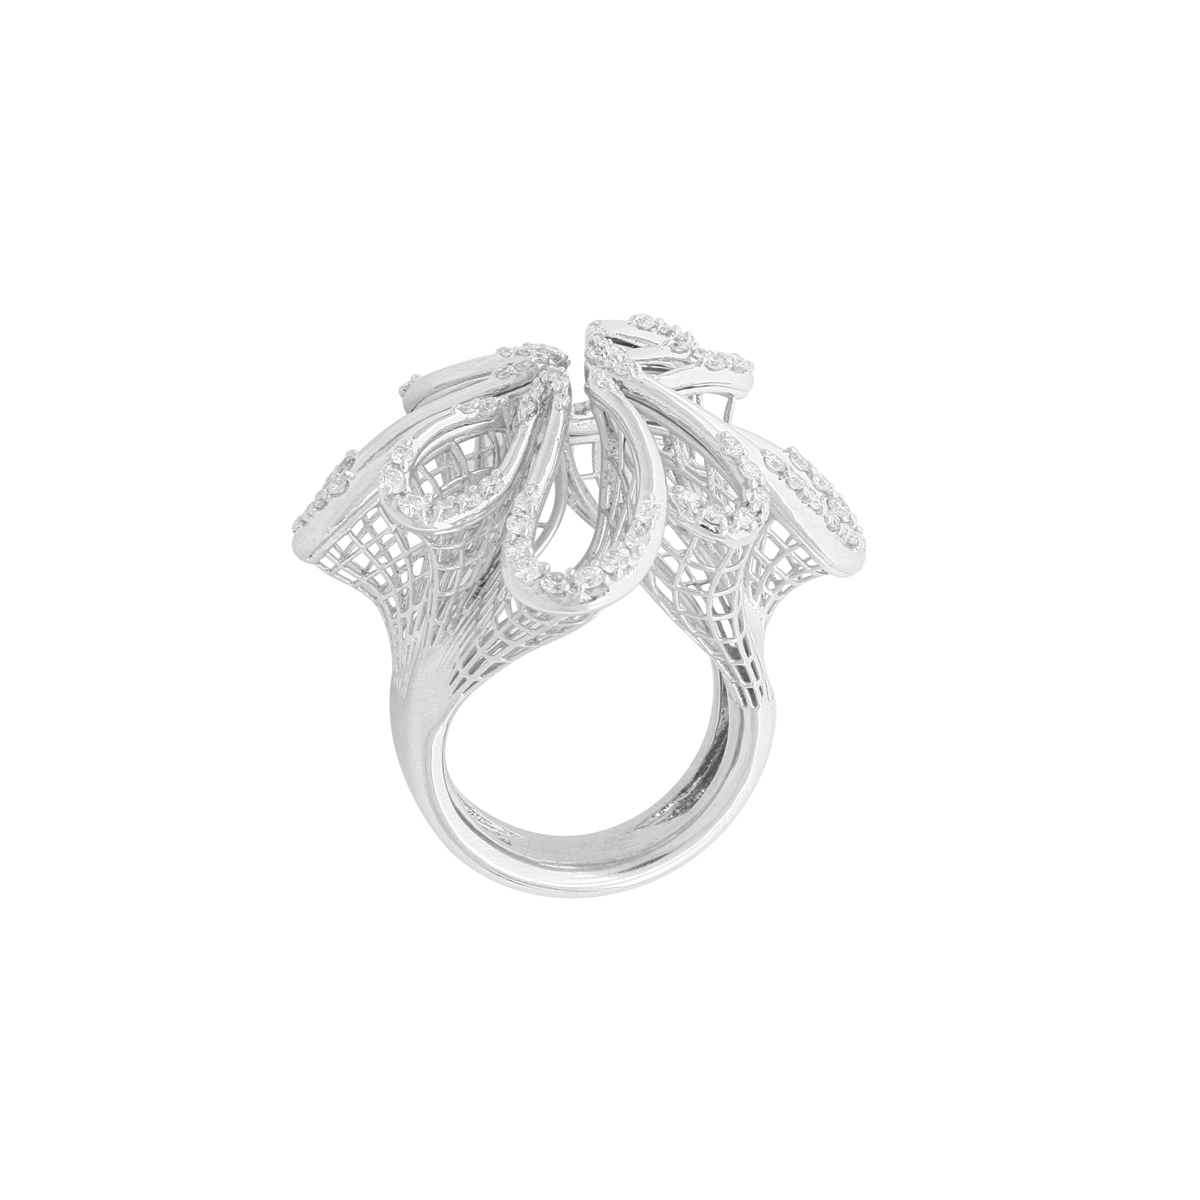 White Gold Calla Flower Bouquet Ring with Diamonds